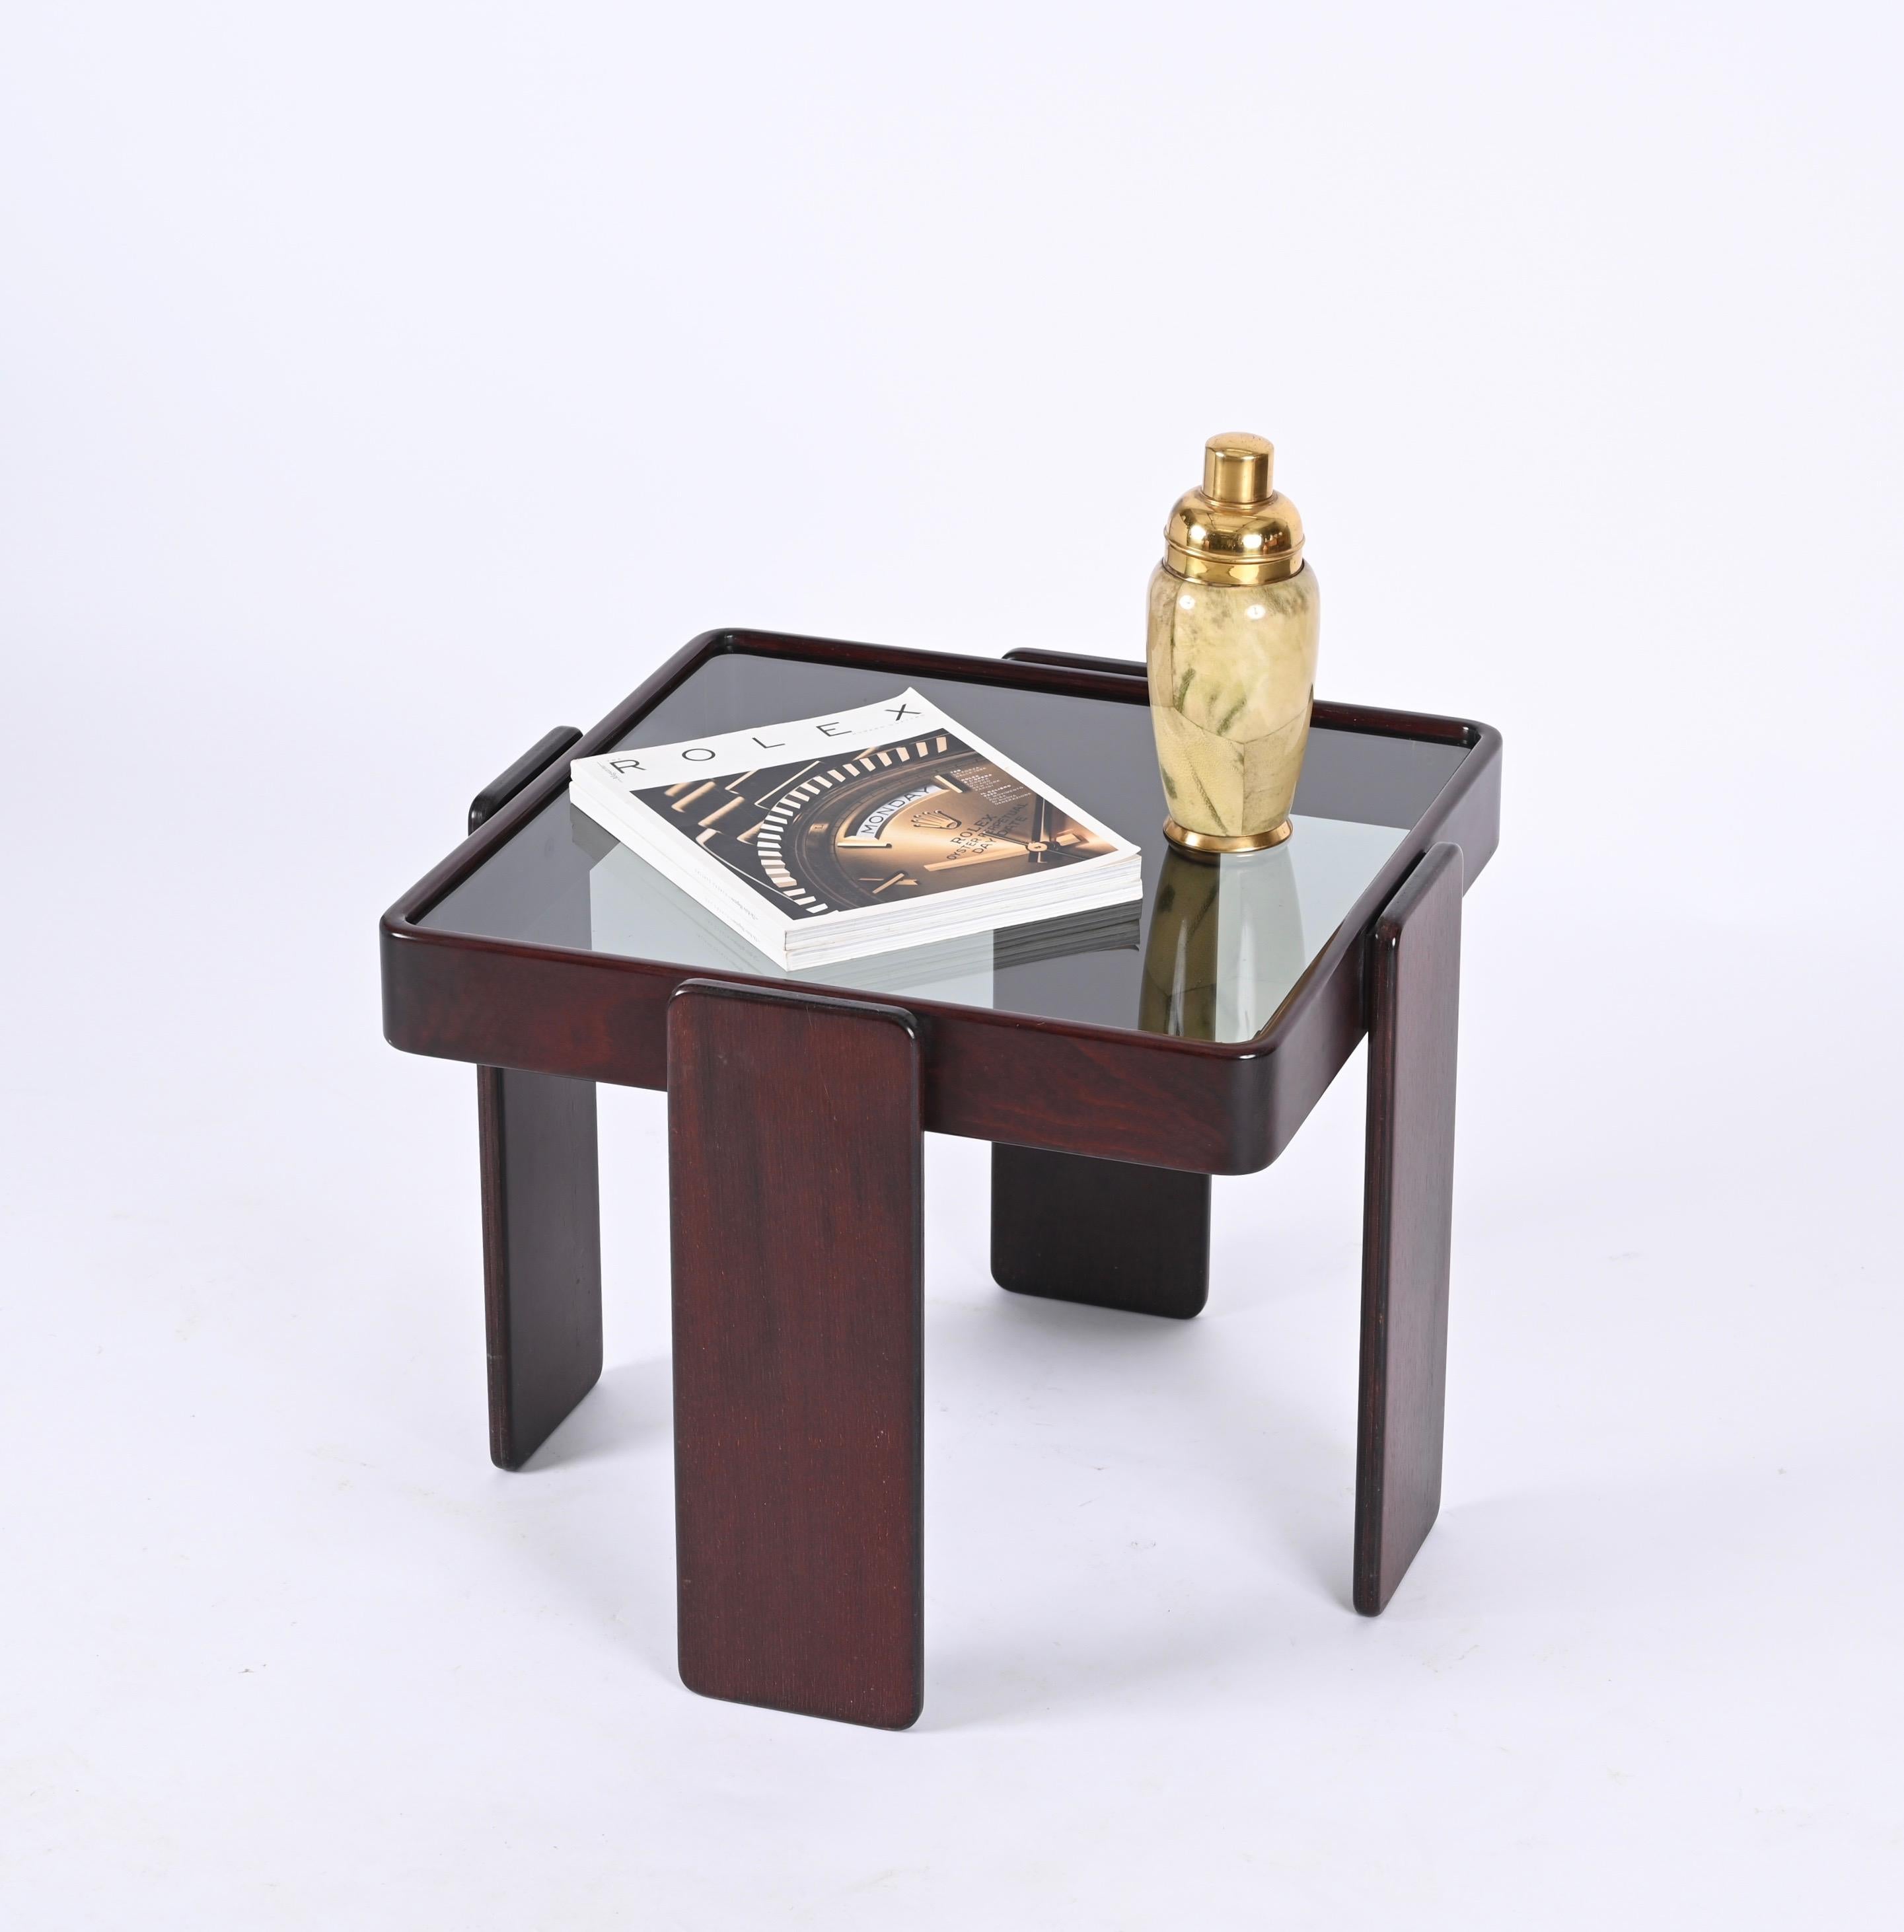 Midcentury Square Coffee Table, Gianfranco Frattini for Cassina, Italy, 1970s For Sale 4